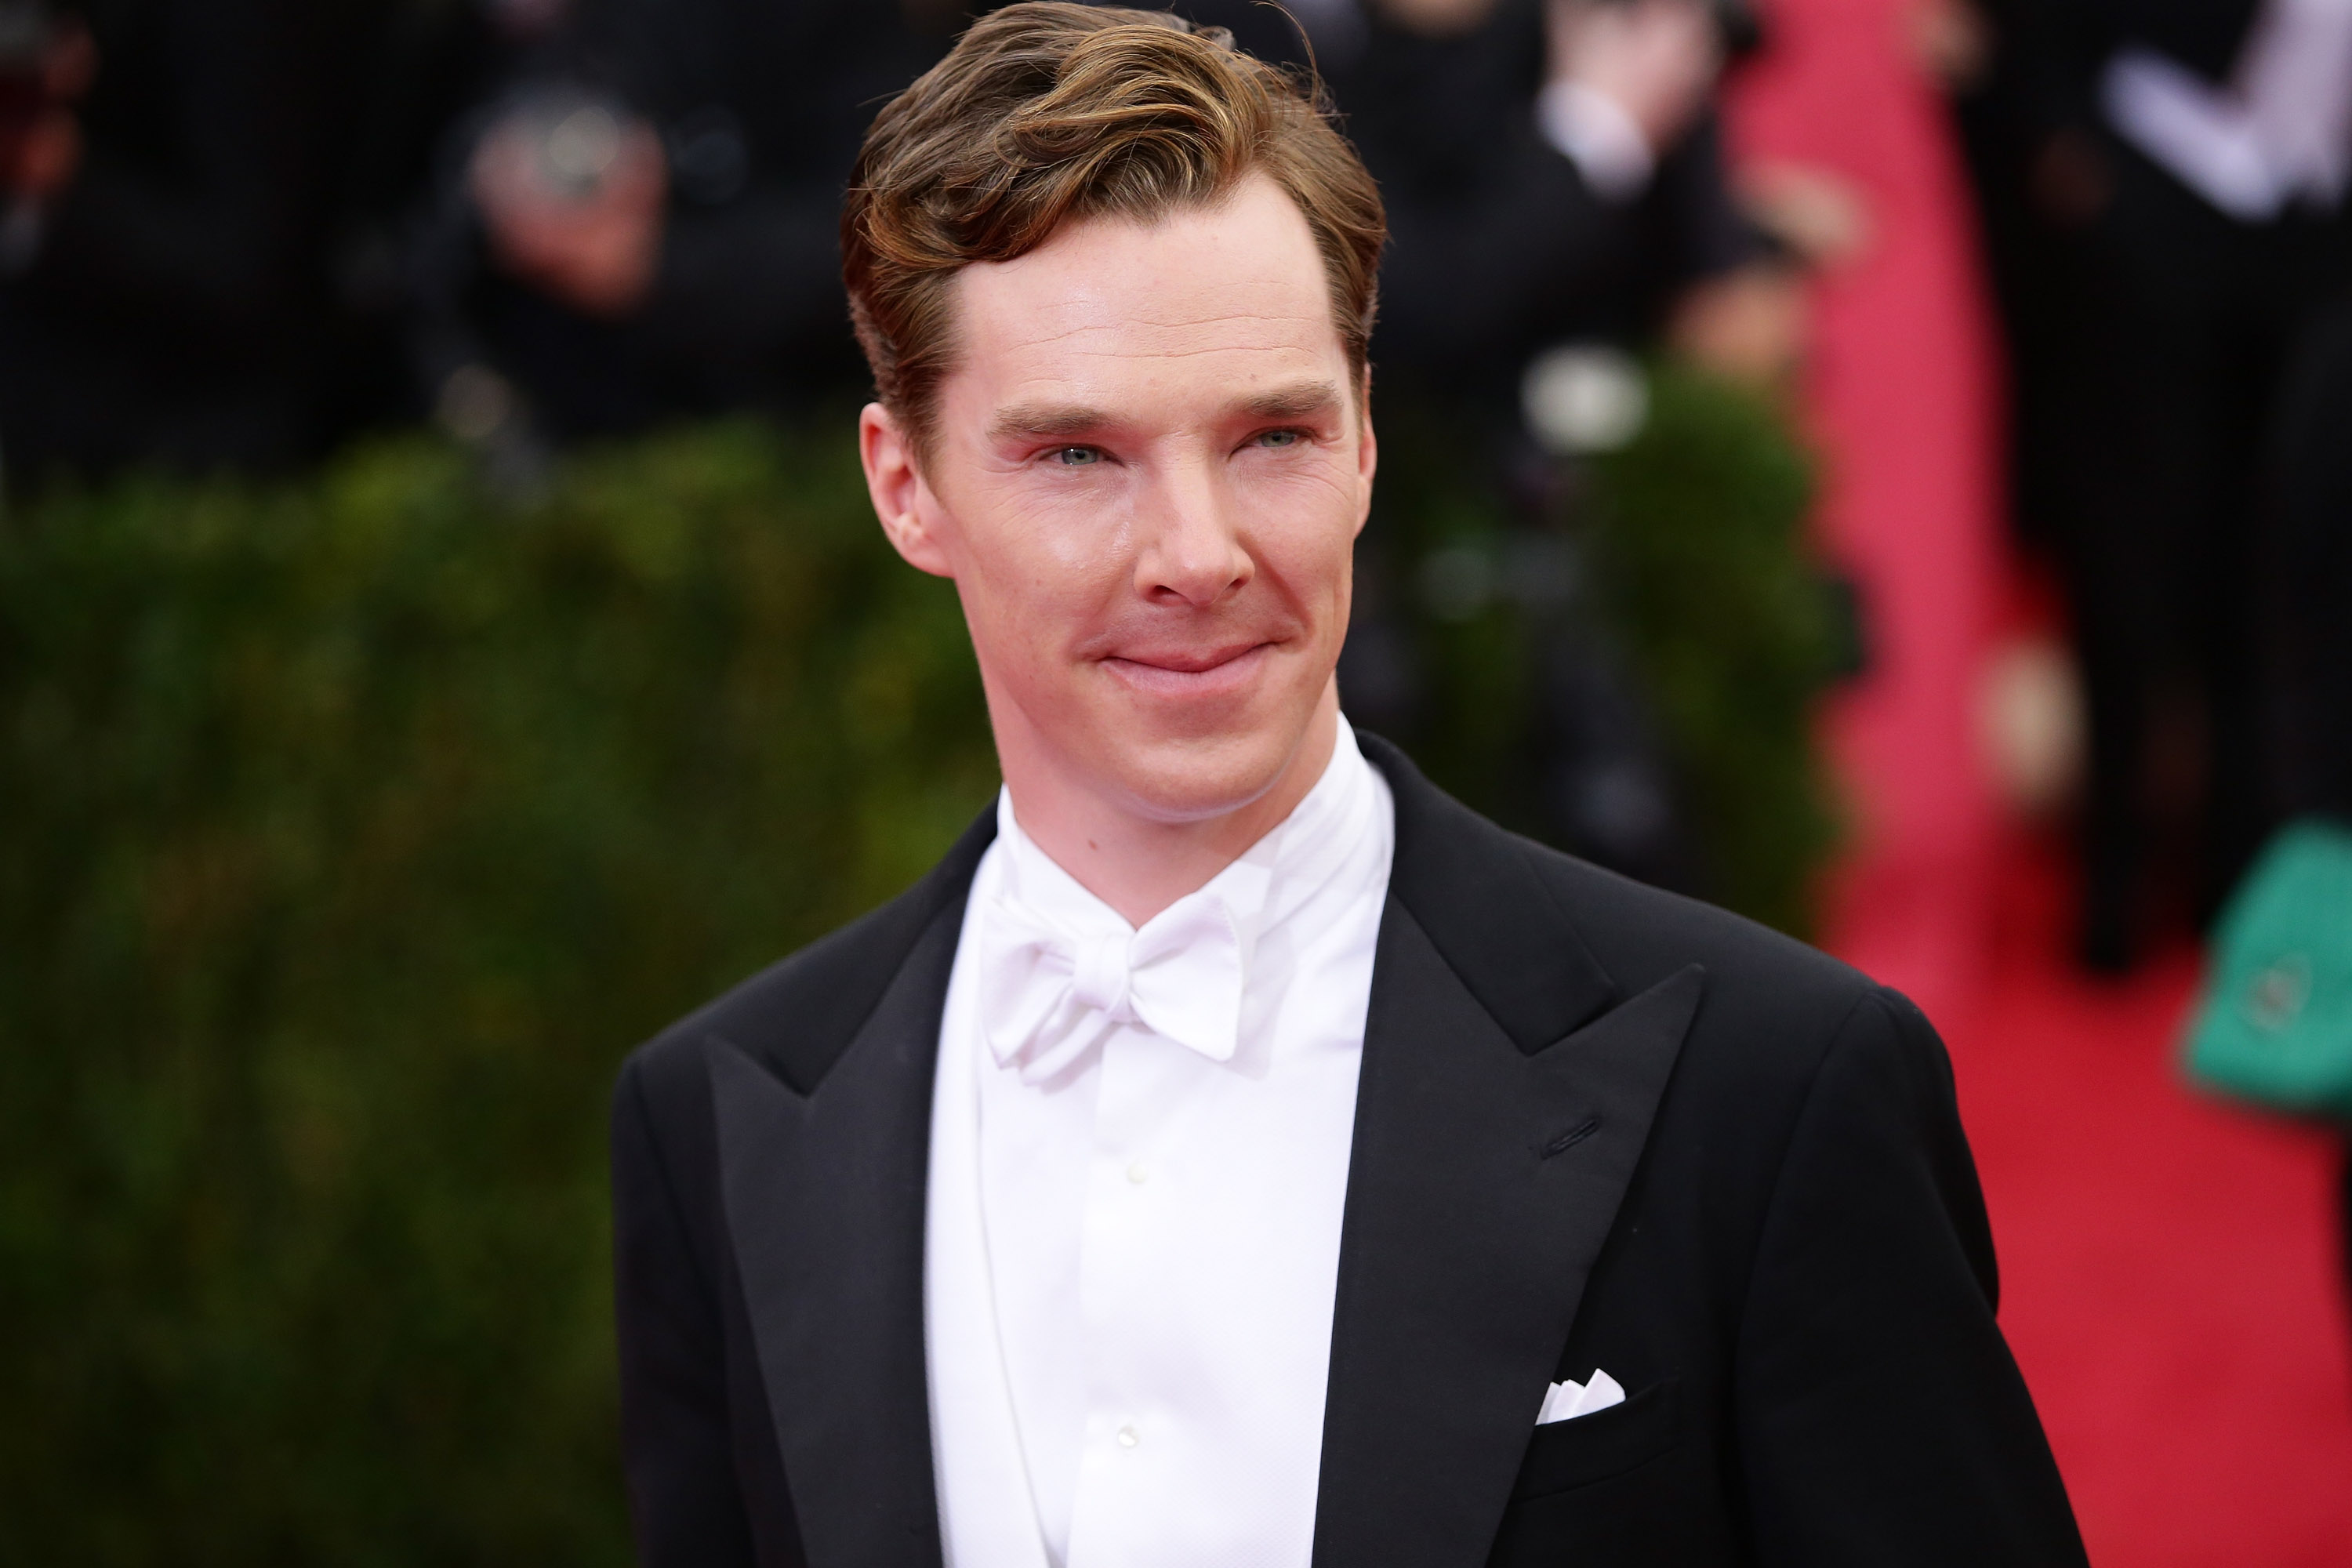 Benedict Cumberbatch attends the "Charles James: Beyond Fashion" Costume Institute Gala at the Metropolitan Museum of Art on May 5, 2014 in New York City. (Neilson Barnard—Getty Images)